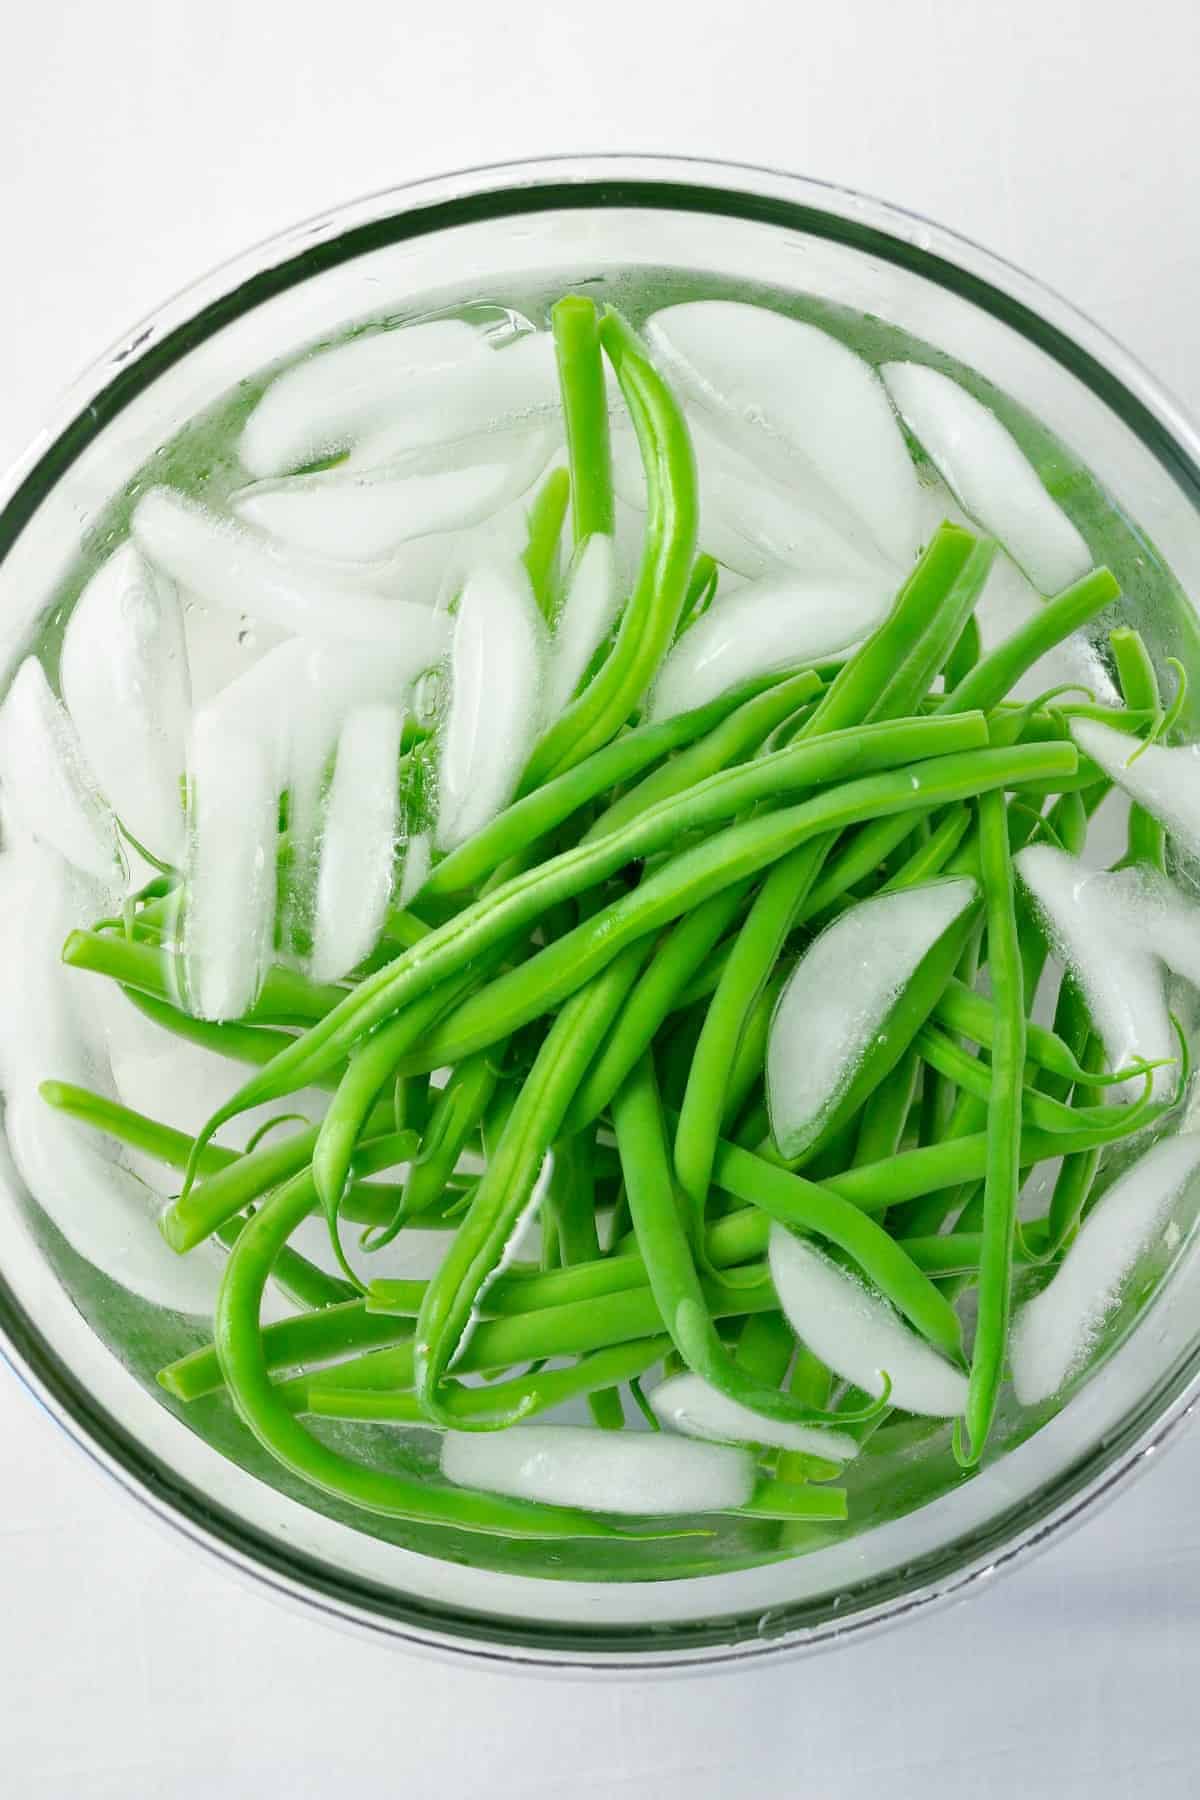 Green beans in ice water